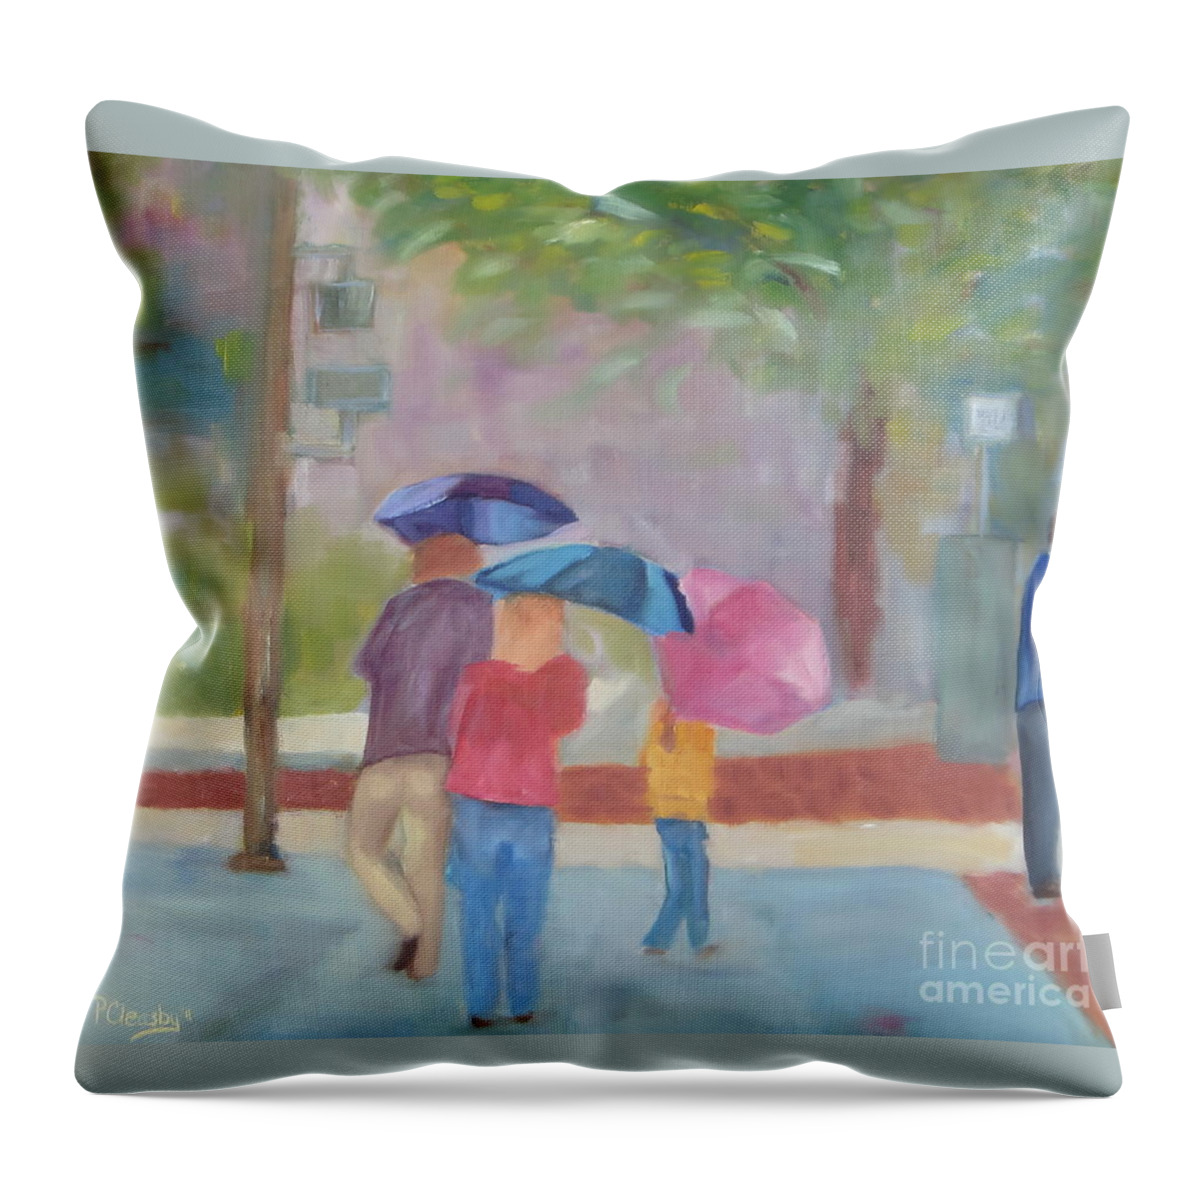 Impressionist Throw Pillow featuring the painting Spring Umbrellas by Patricia Cleasby